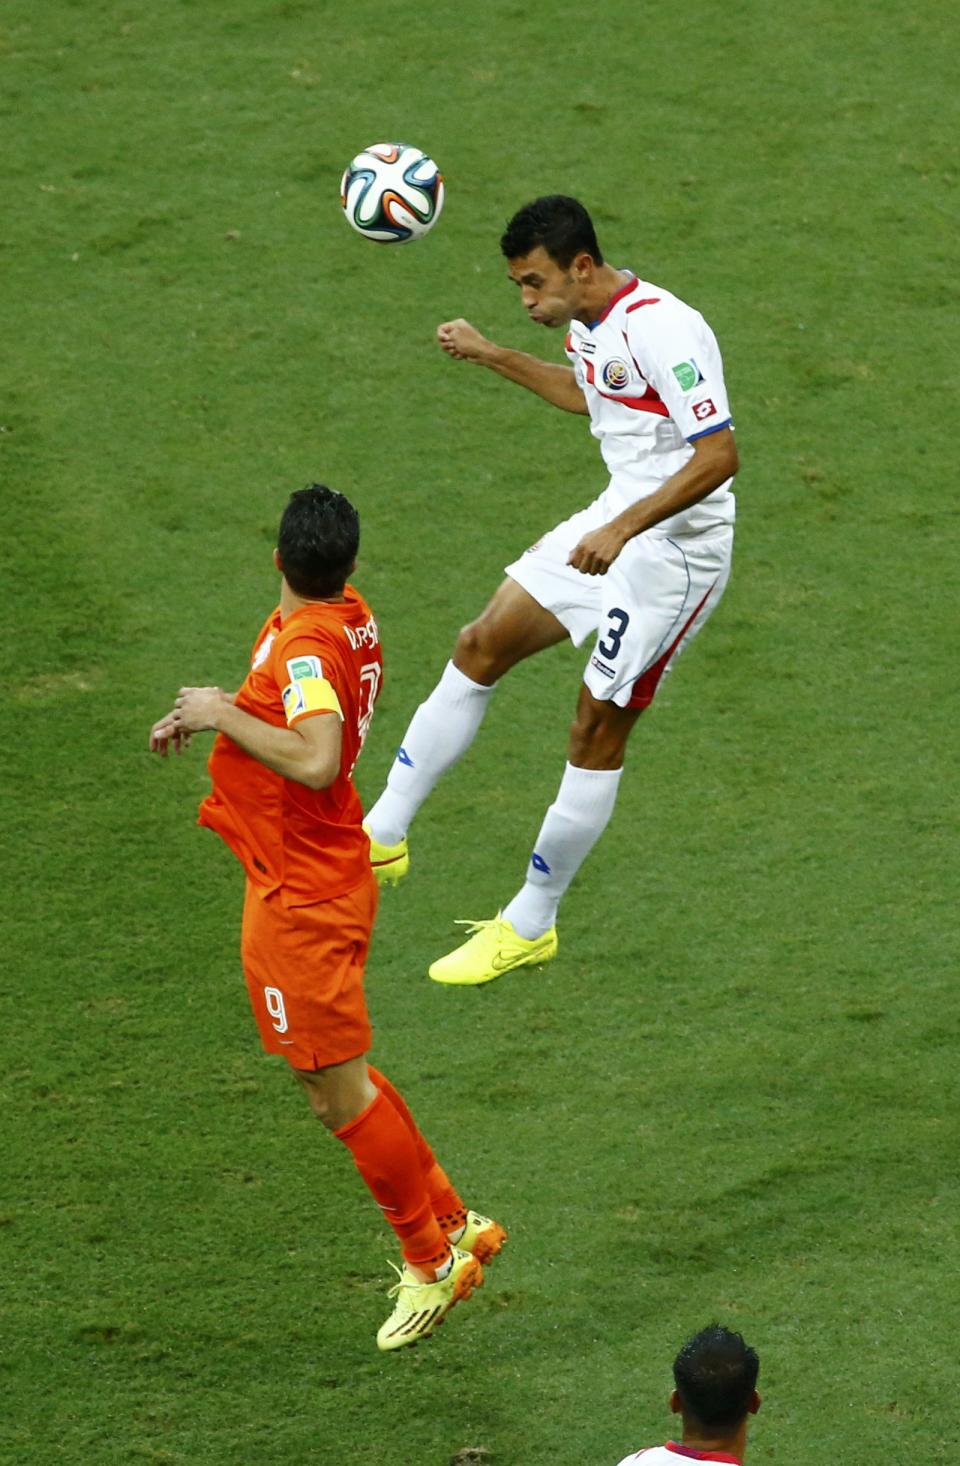 Robin van Persie of the Netherlands jumps for the ball with Costa Rica's Giancarlo Gonzalez during their 2014 World Cup quarter-finals at the Fonte Nova arena in Salvador July 5, 2014. REUTERS/Ruben Sprich